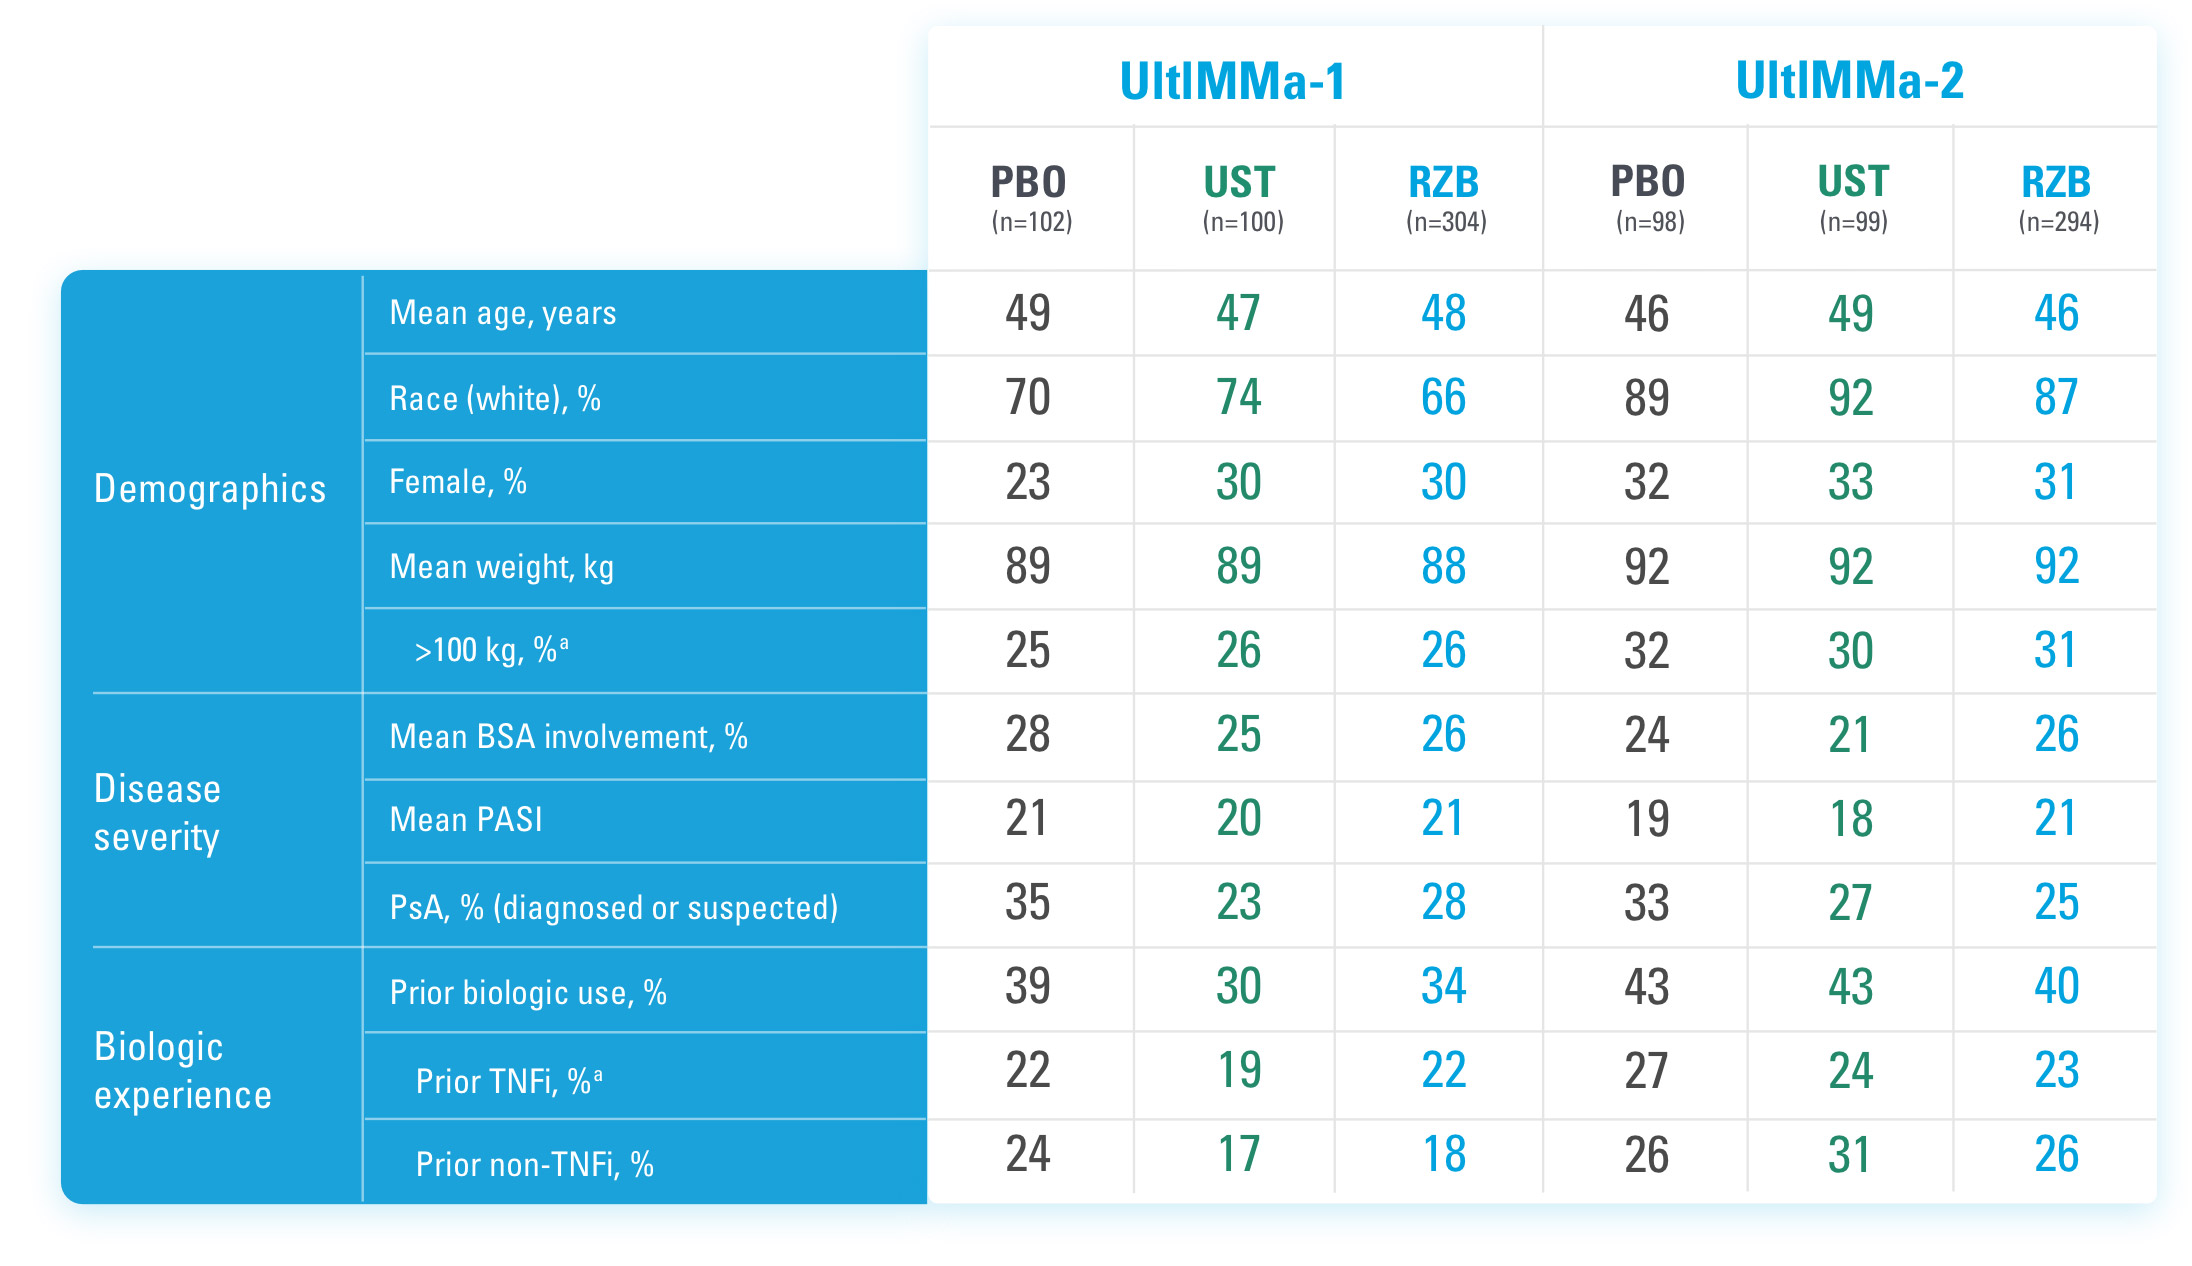 Selected baseline characteristics for UltIMMa-1 and UltIMMa-2.